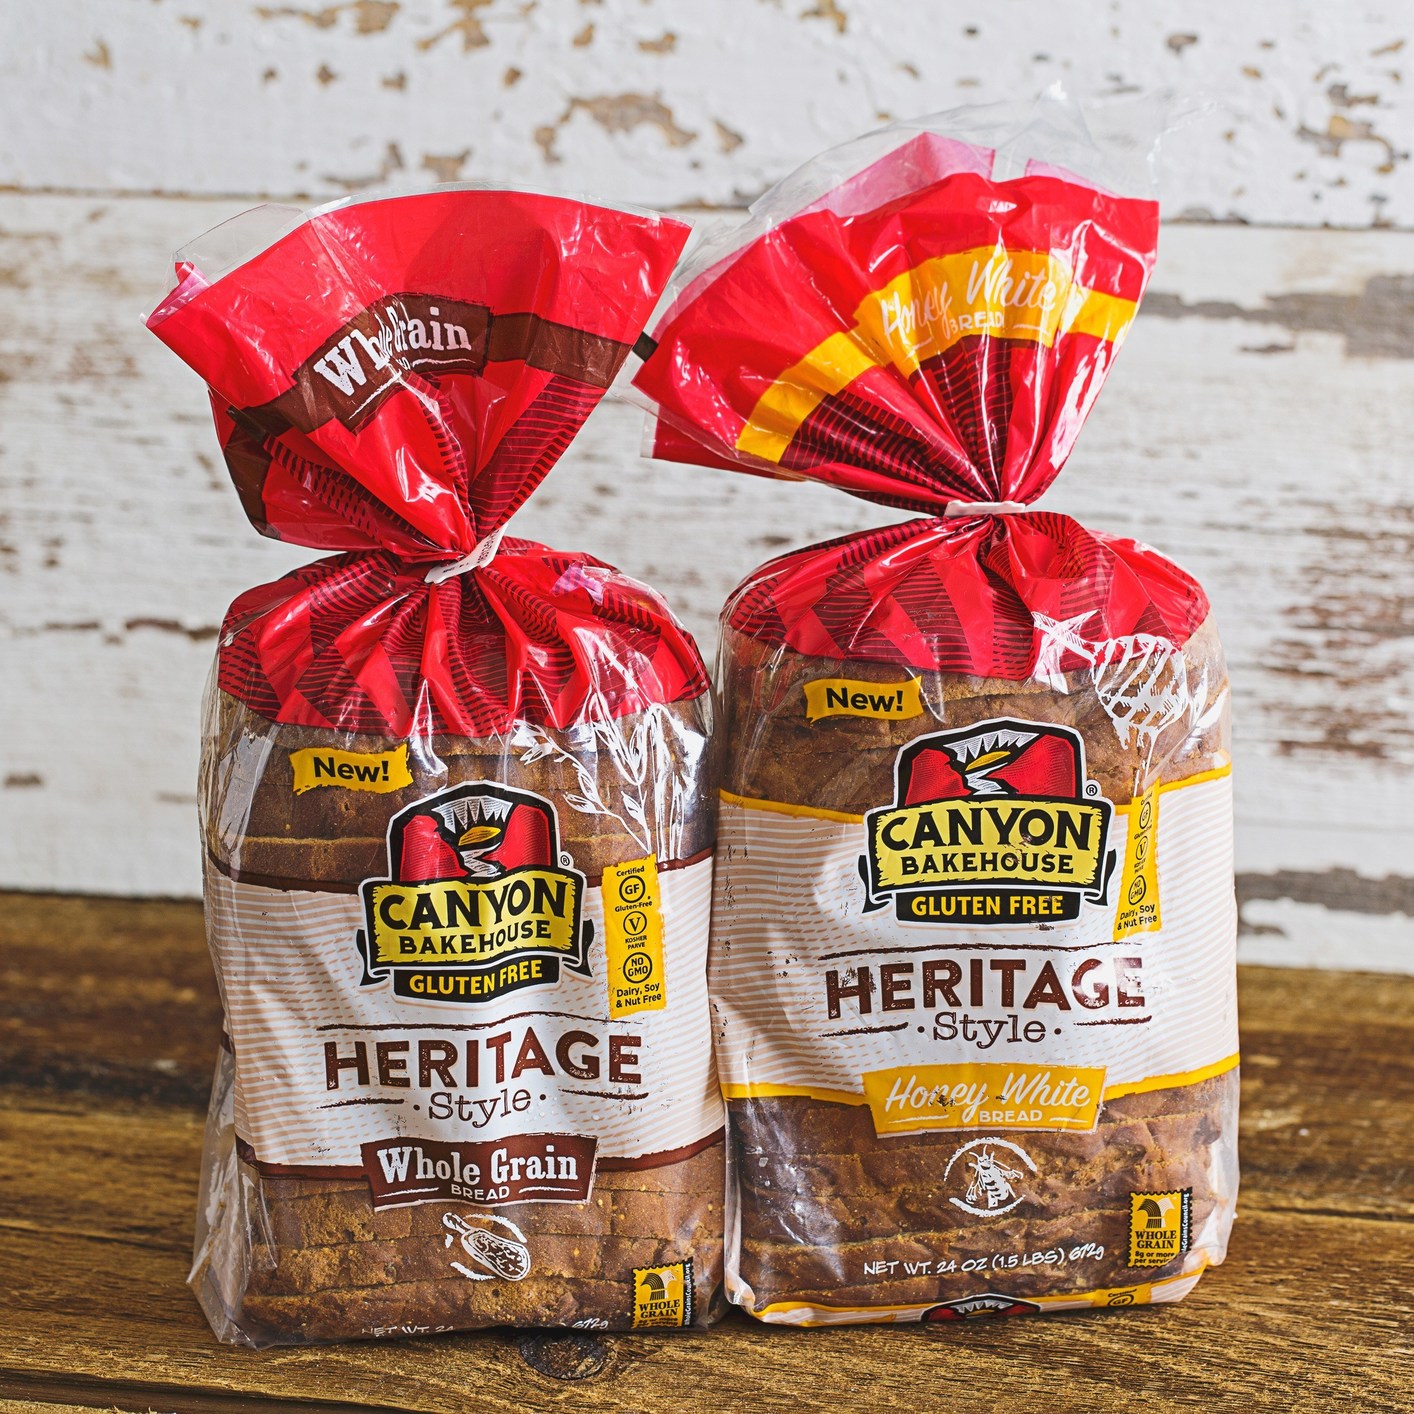 Caution! Wide Loaf: Canyon Bakehouse Is Rolling Out Something Big - PR Newswire (press release)